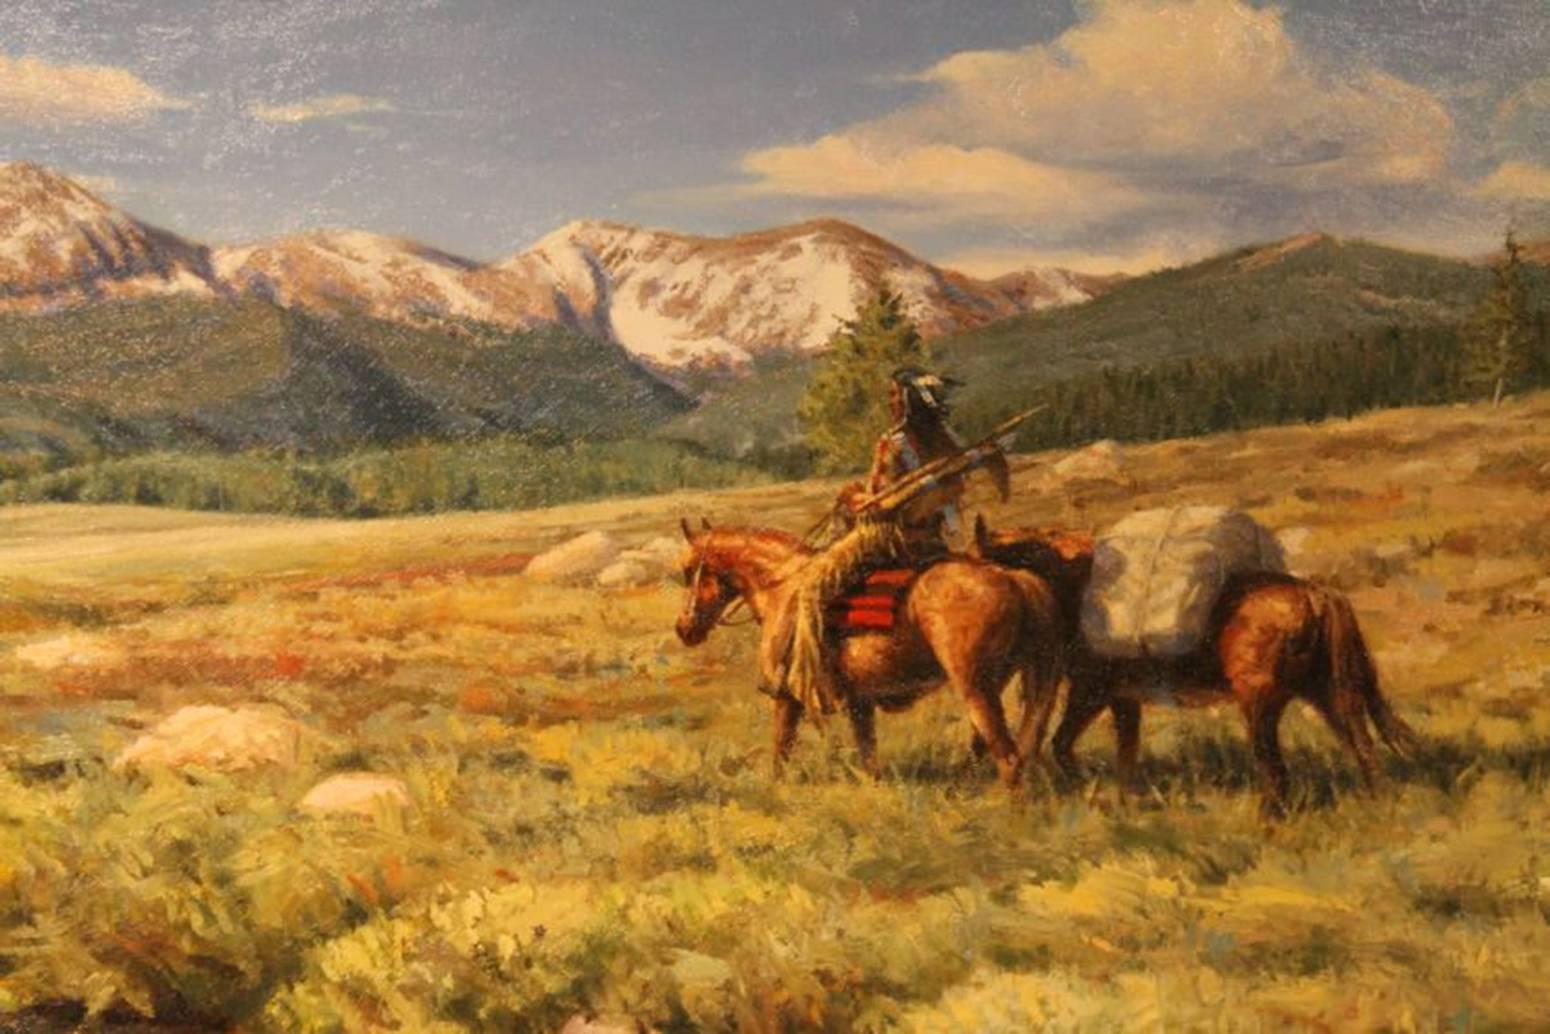 At The Headwaters - Realist Painting by Joseph Velazquez